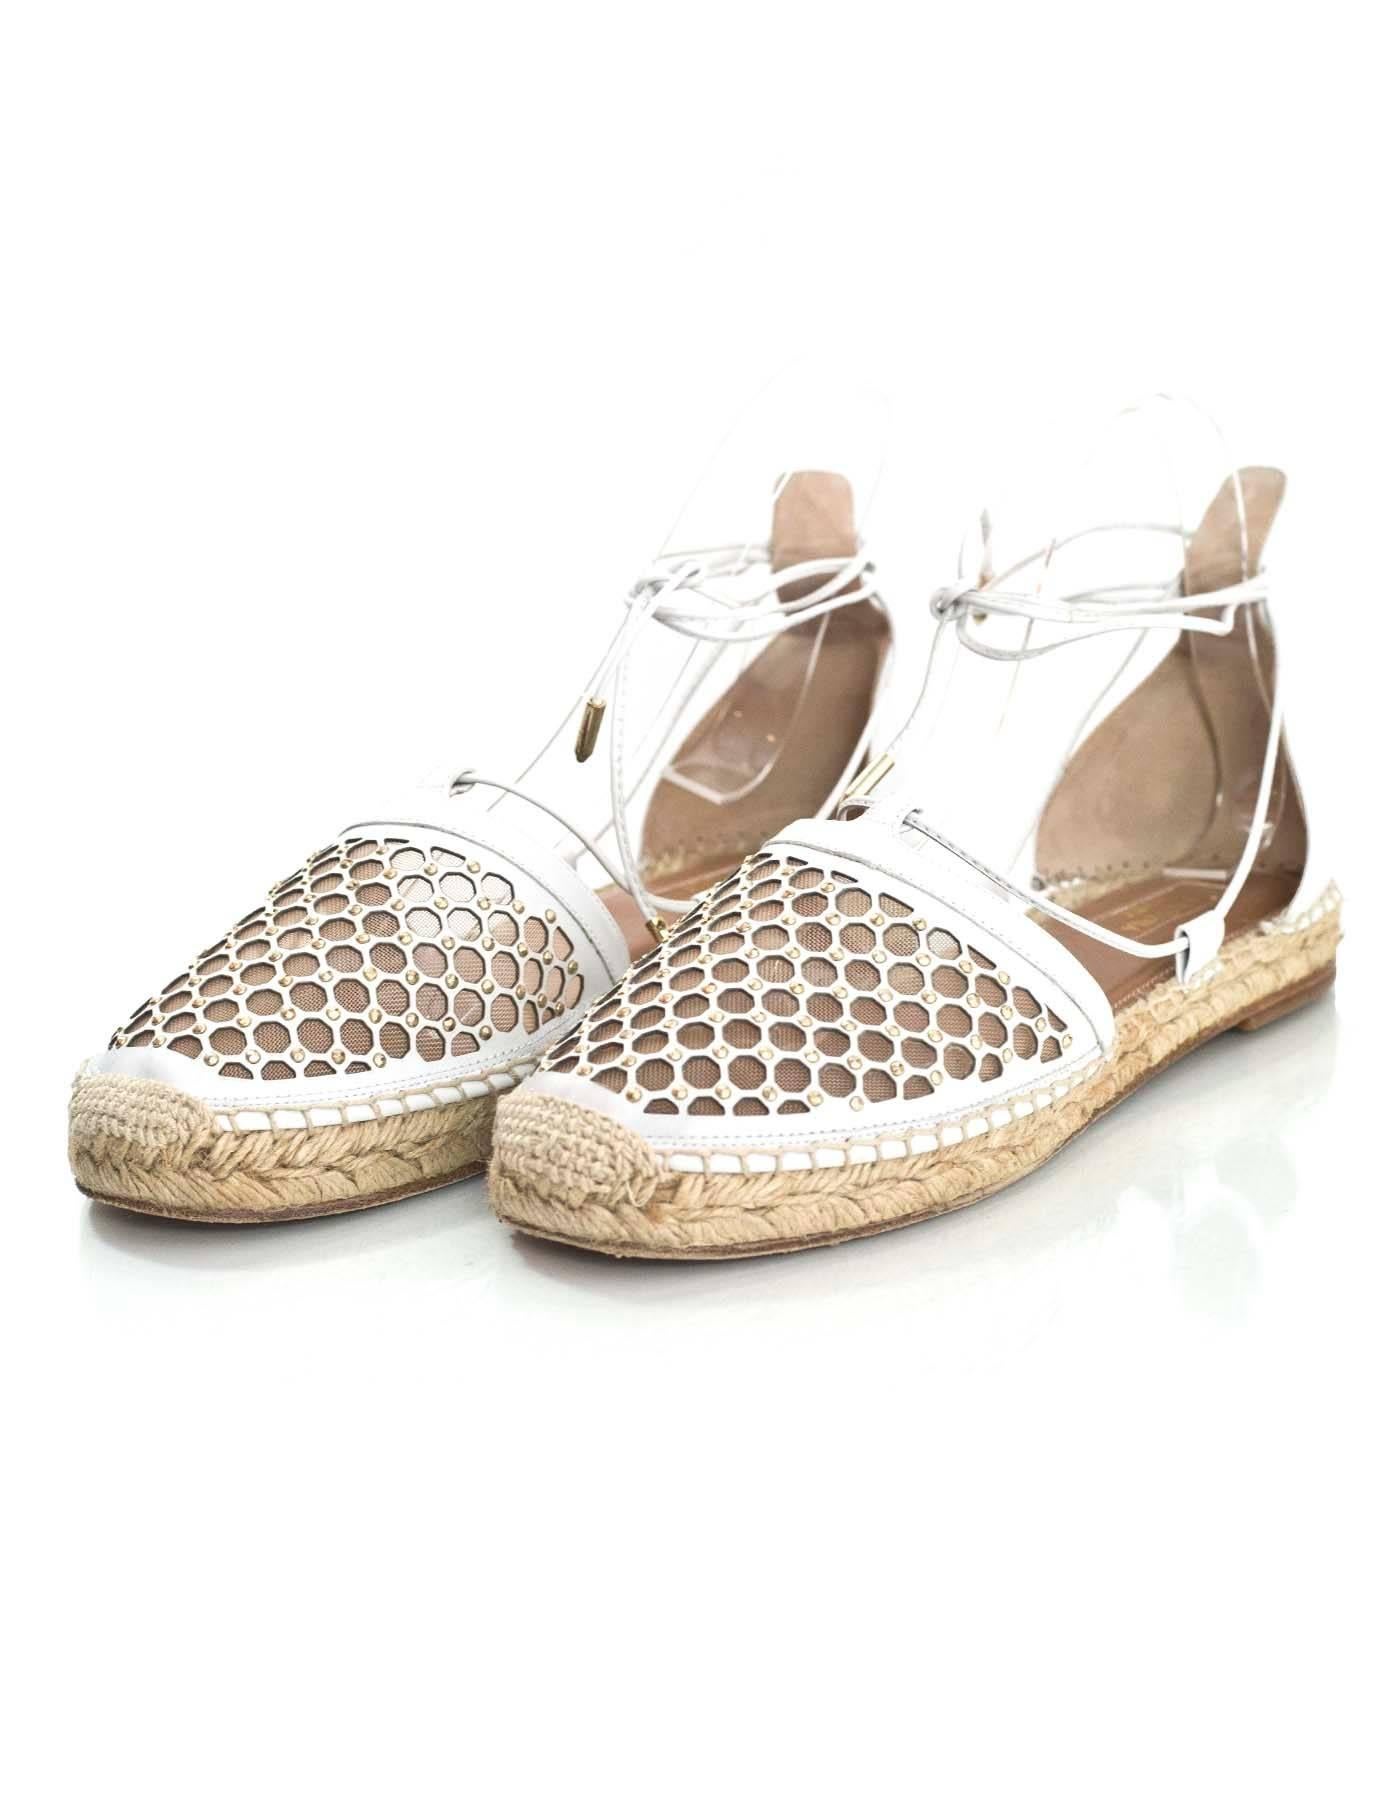 Aquazzura White Leather Blondie Espadrilles Sz 38.5

Made In: Spain
Color: Black
Materials: Leather, mesh
Closure/Opening: Lace tie closure
Sole Stamp: Aquazzura Firenze Vero Cuoio Made In Spain 38.5
Overall Condition: Excellent pre-owned condition